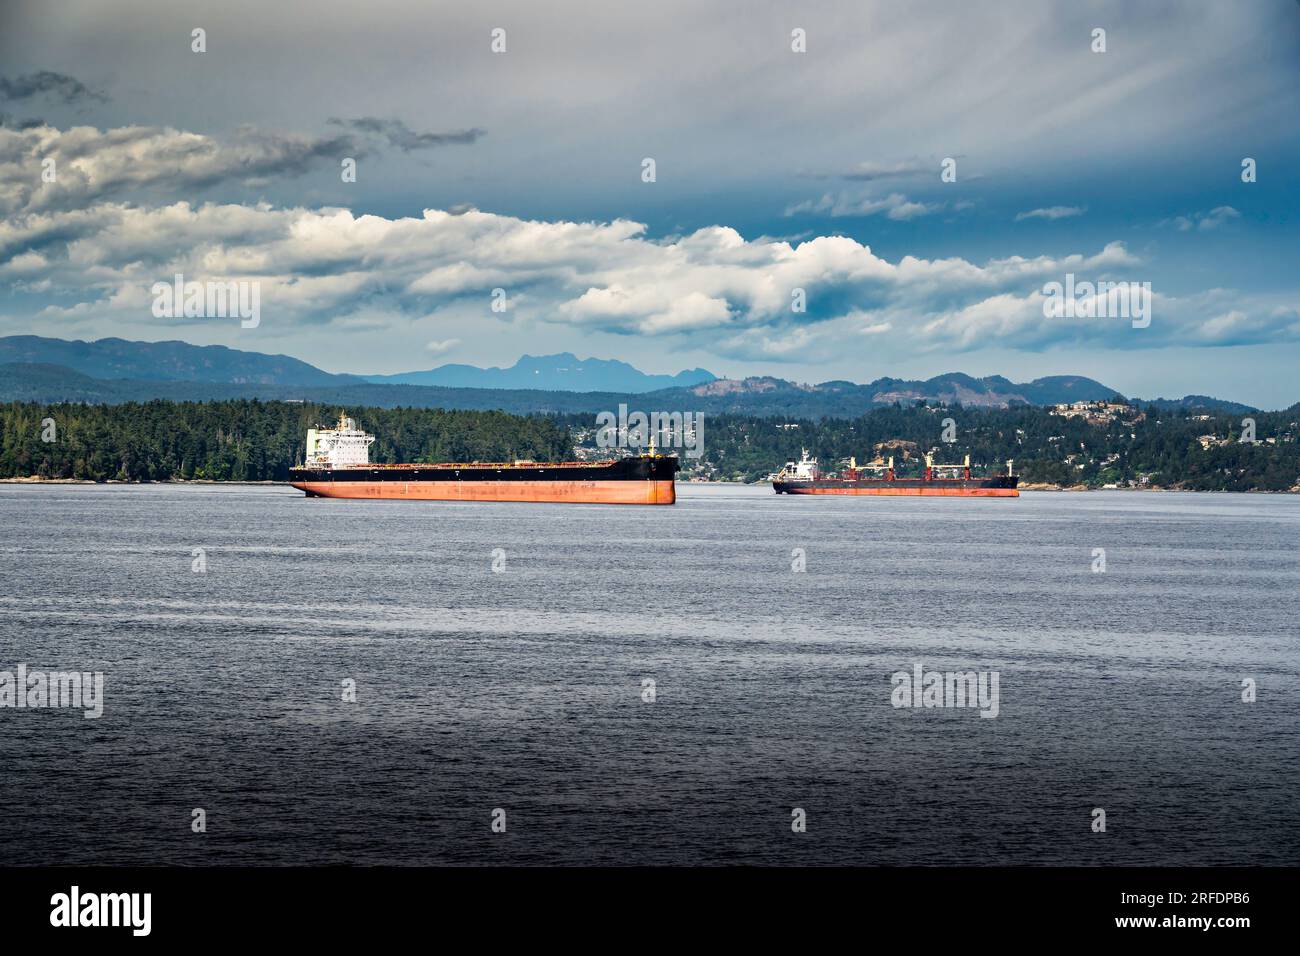 Empty freighters and container ships anchored off the coast of Vancouver Island awaiting to be loaded during the BC Port Workers Strike at Nanaimo BC. Stock Photo